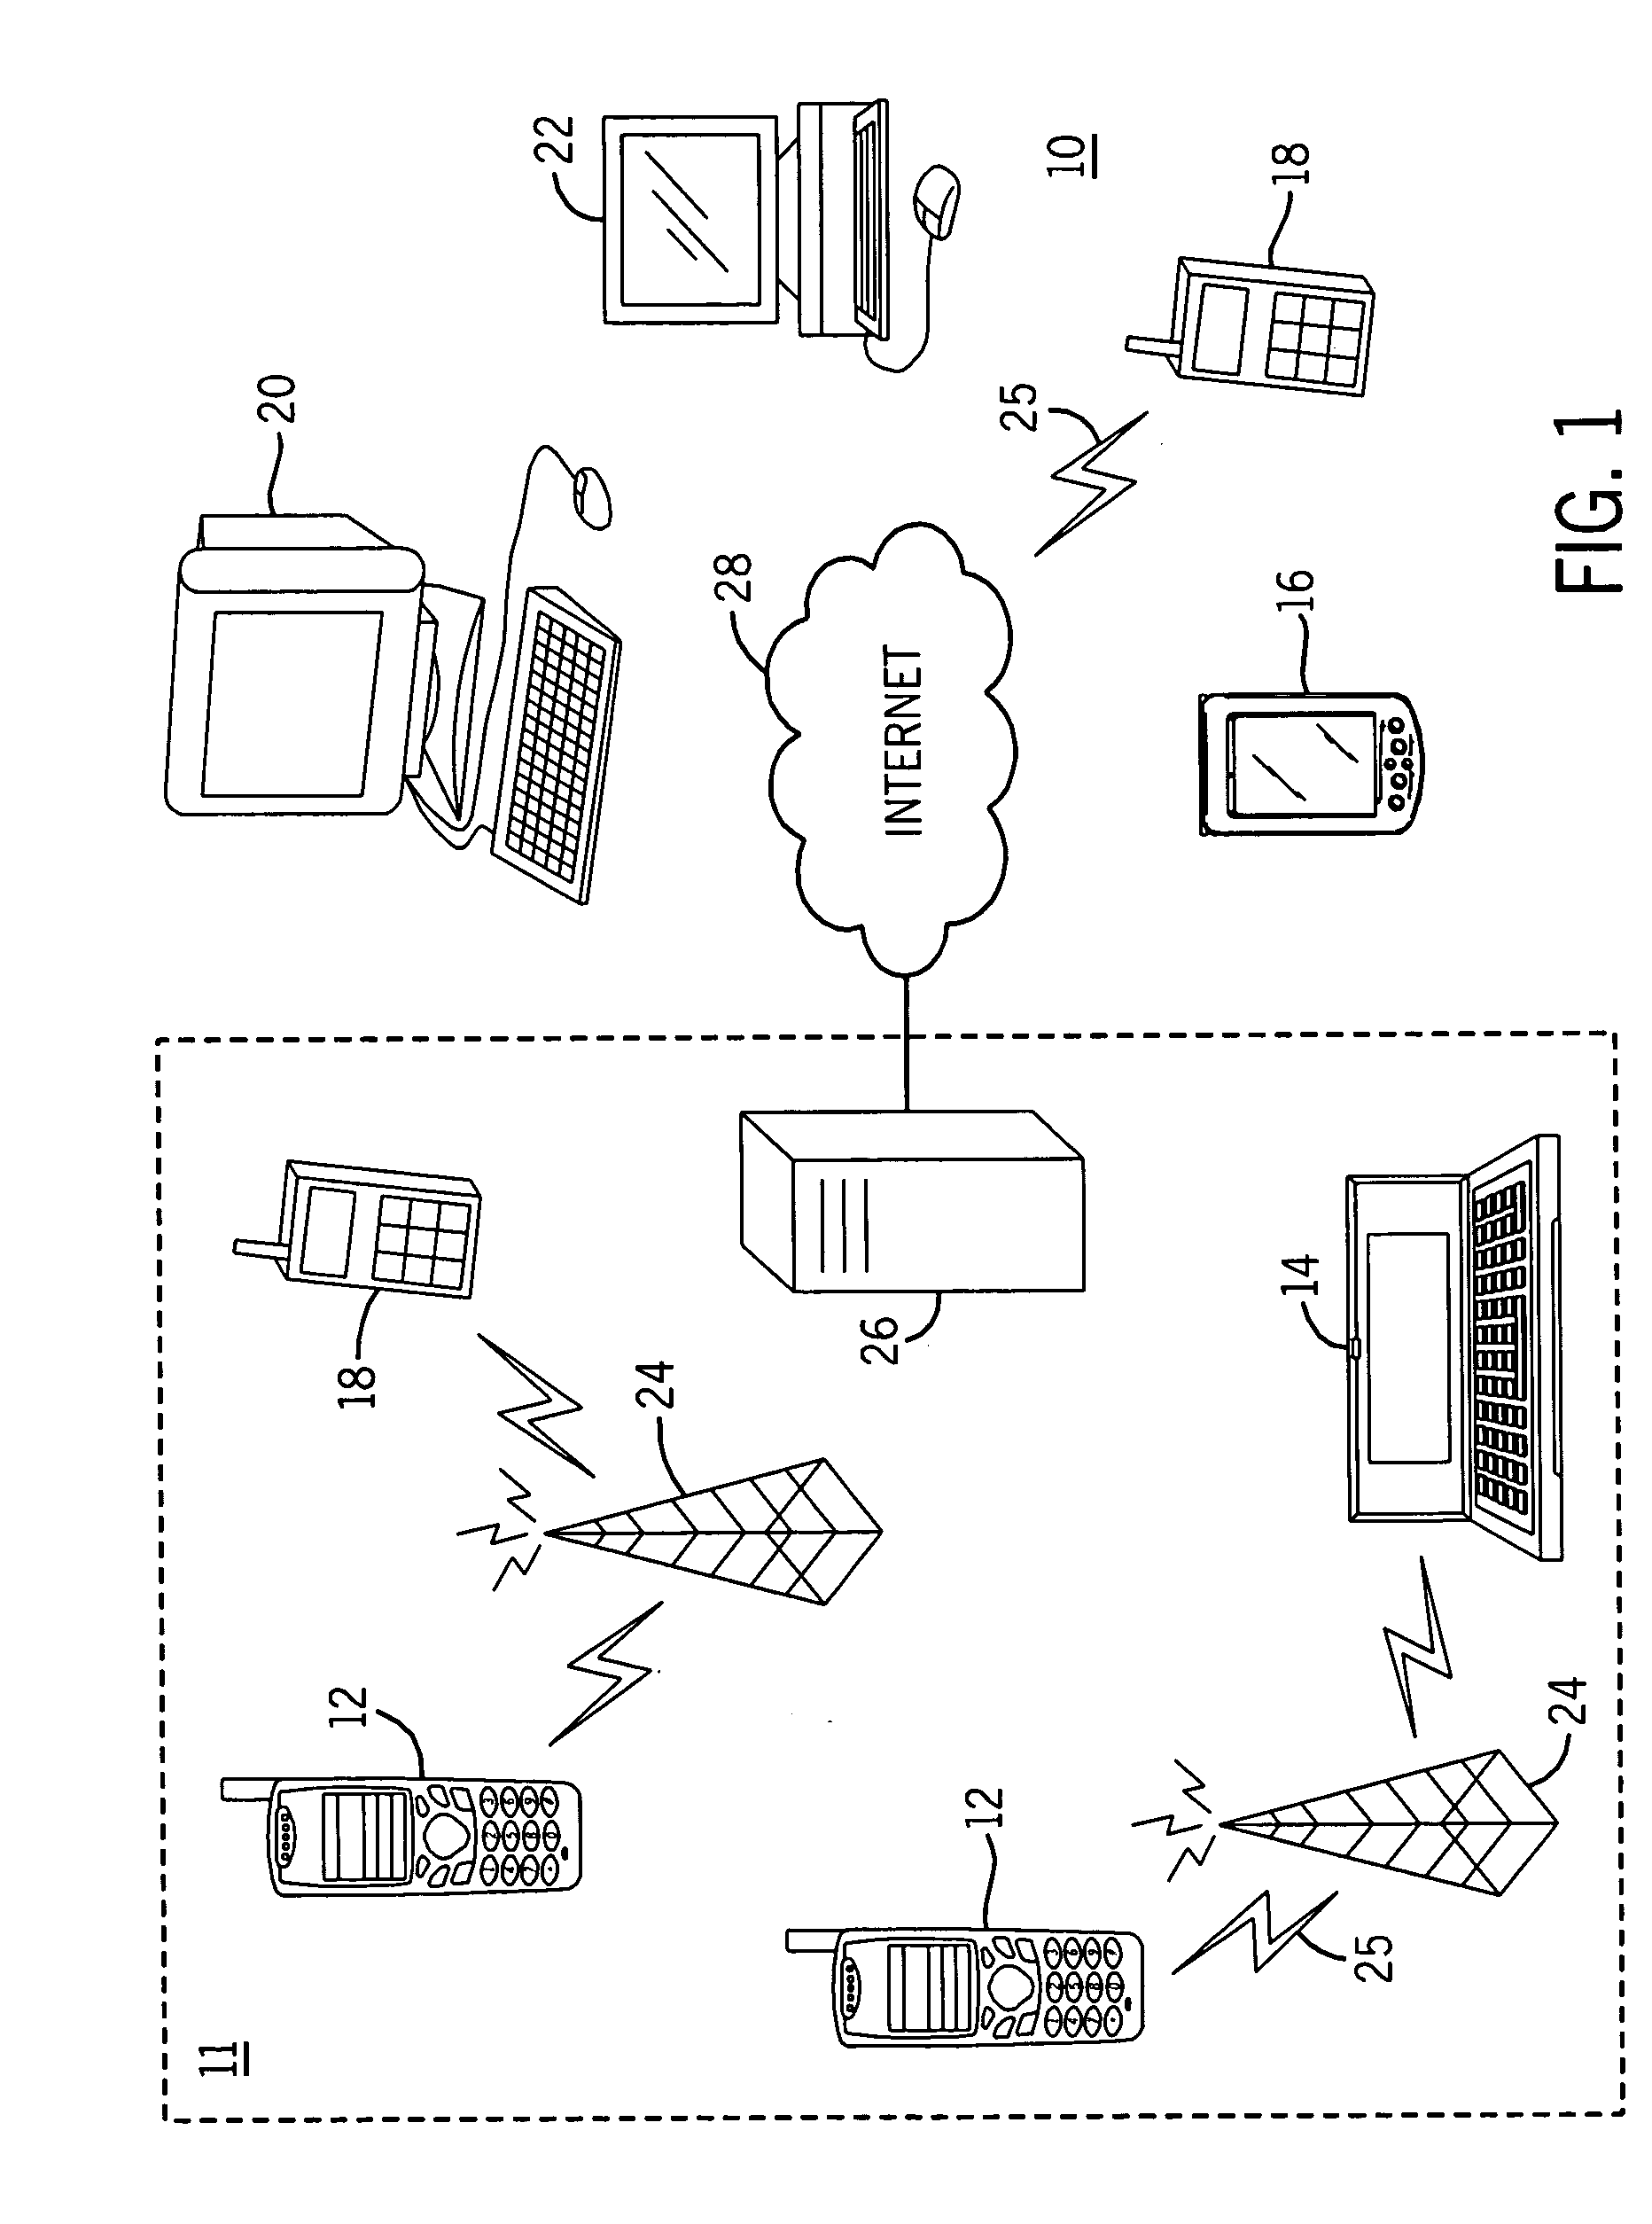 Mobile network optimized method for keeping an application IP connection always on